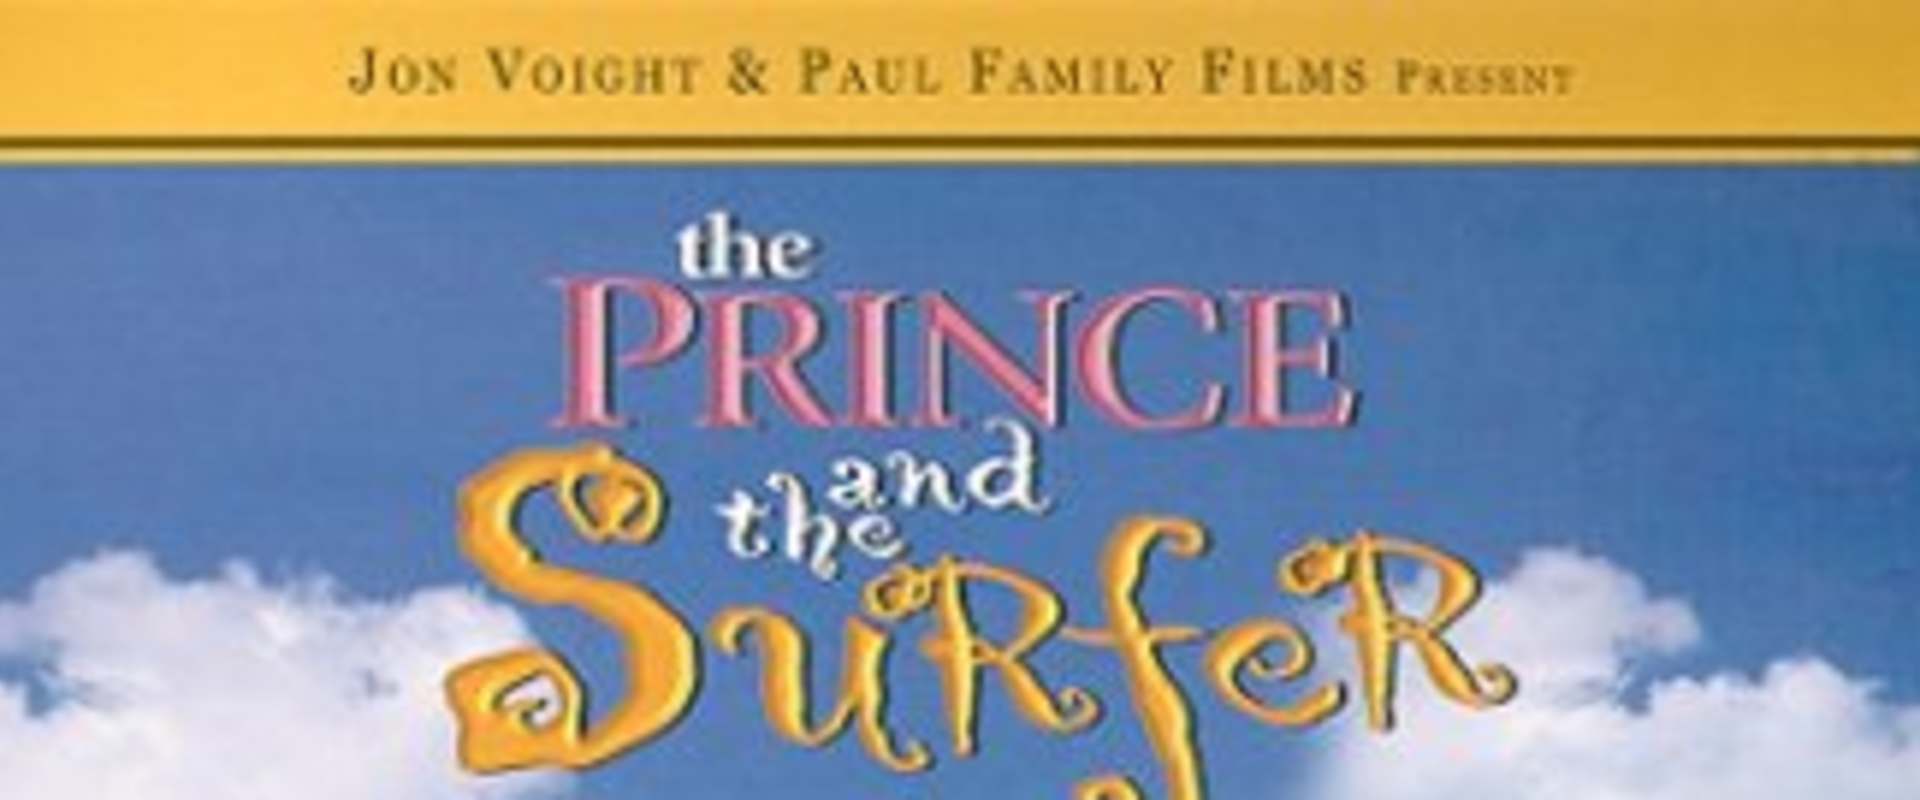 The Prince and the Surfer background 1